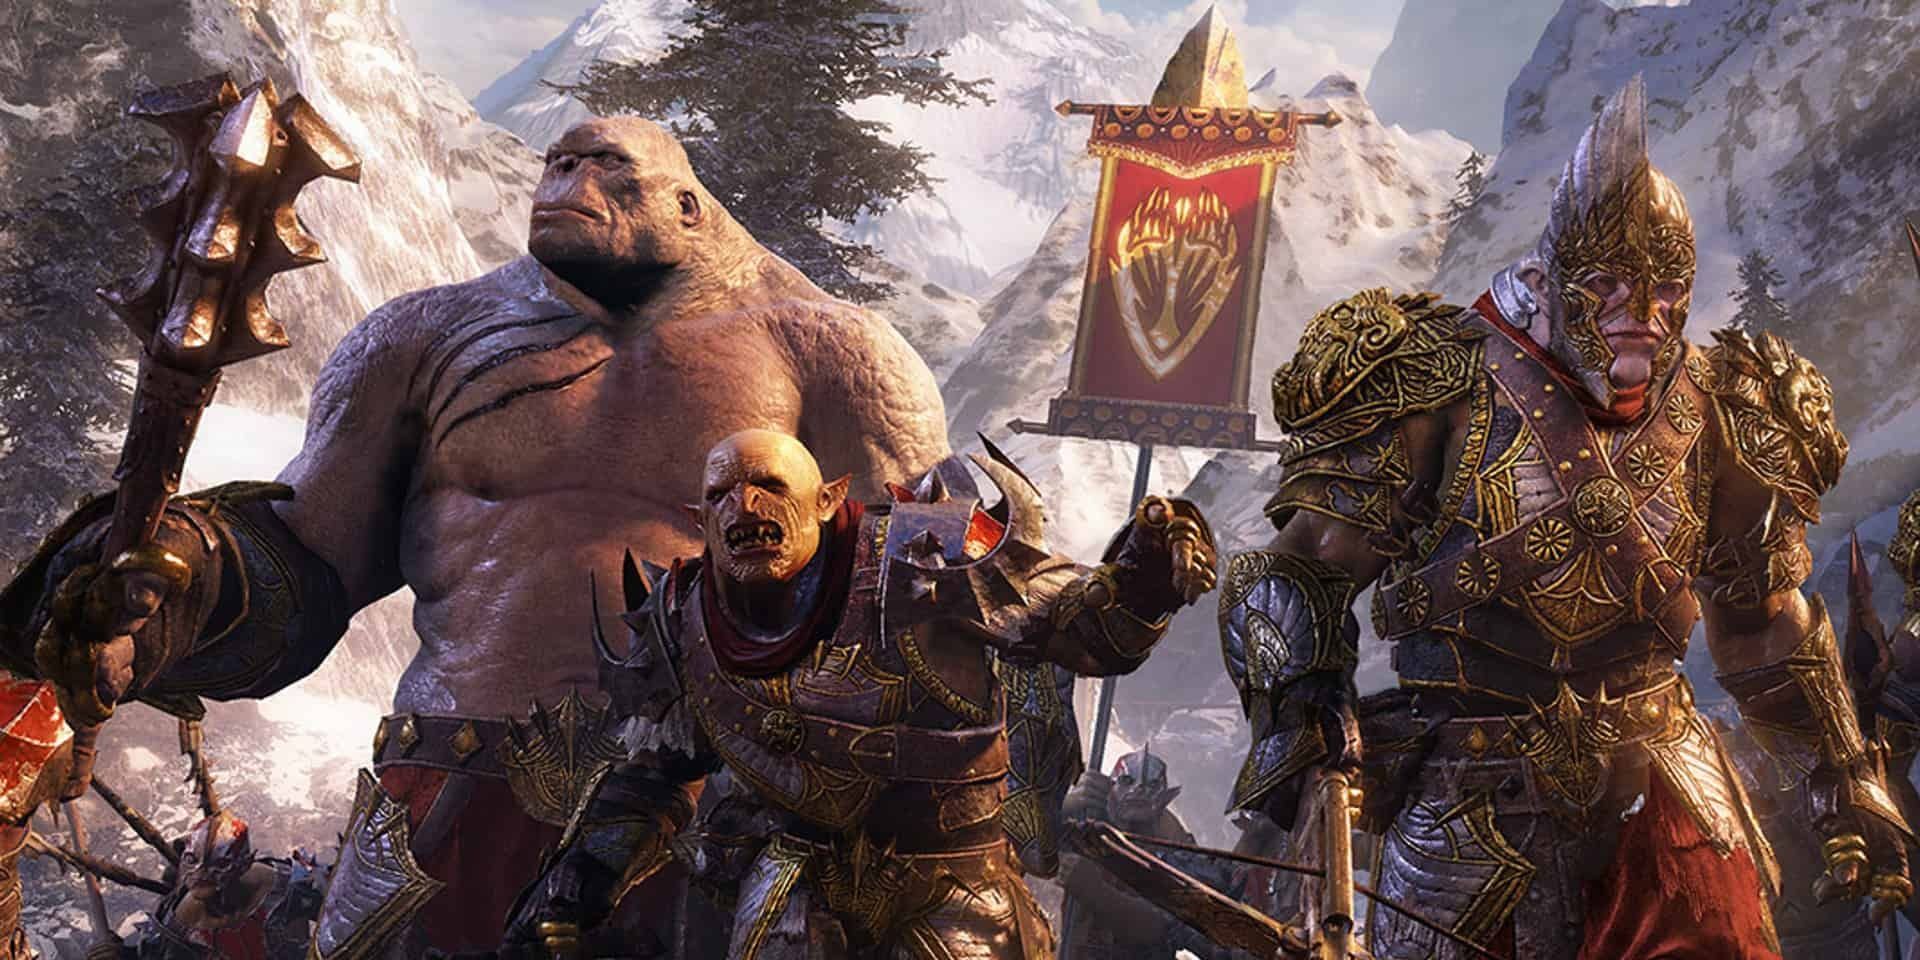 Two orcs and a troll march into battle in Lord of the Rings Shadow of War video game